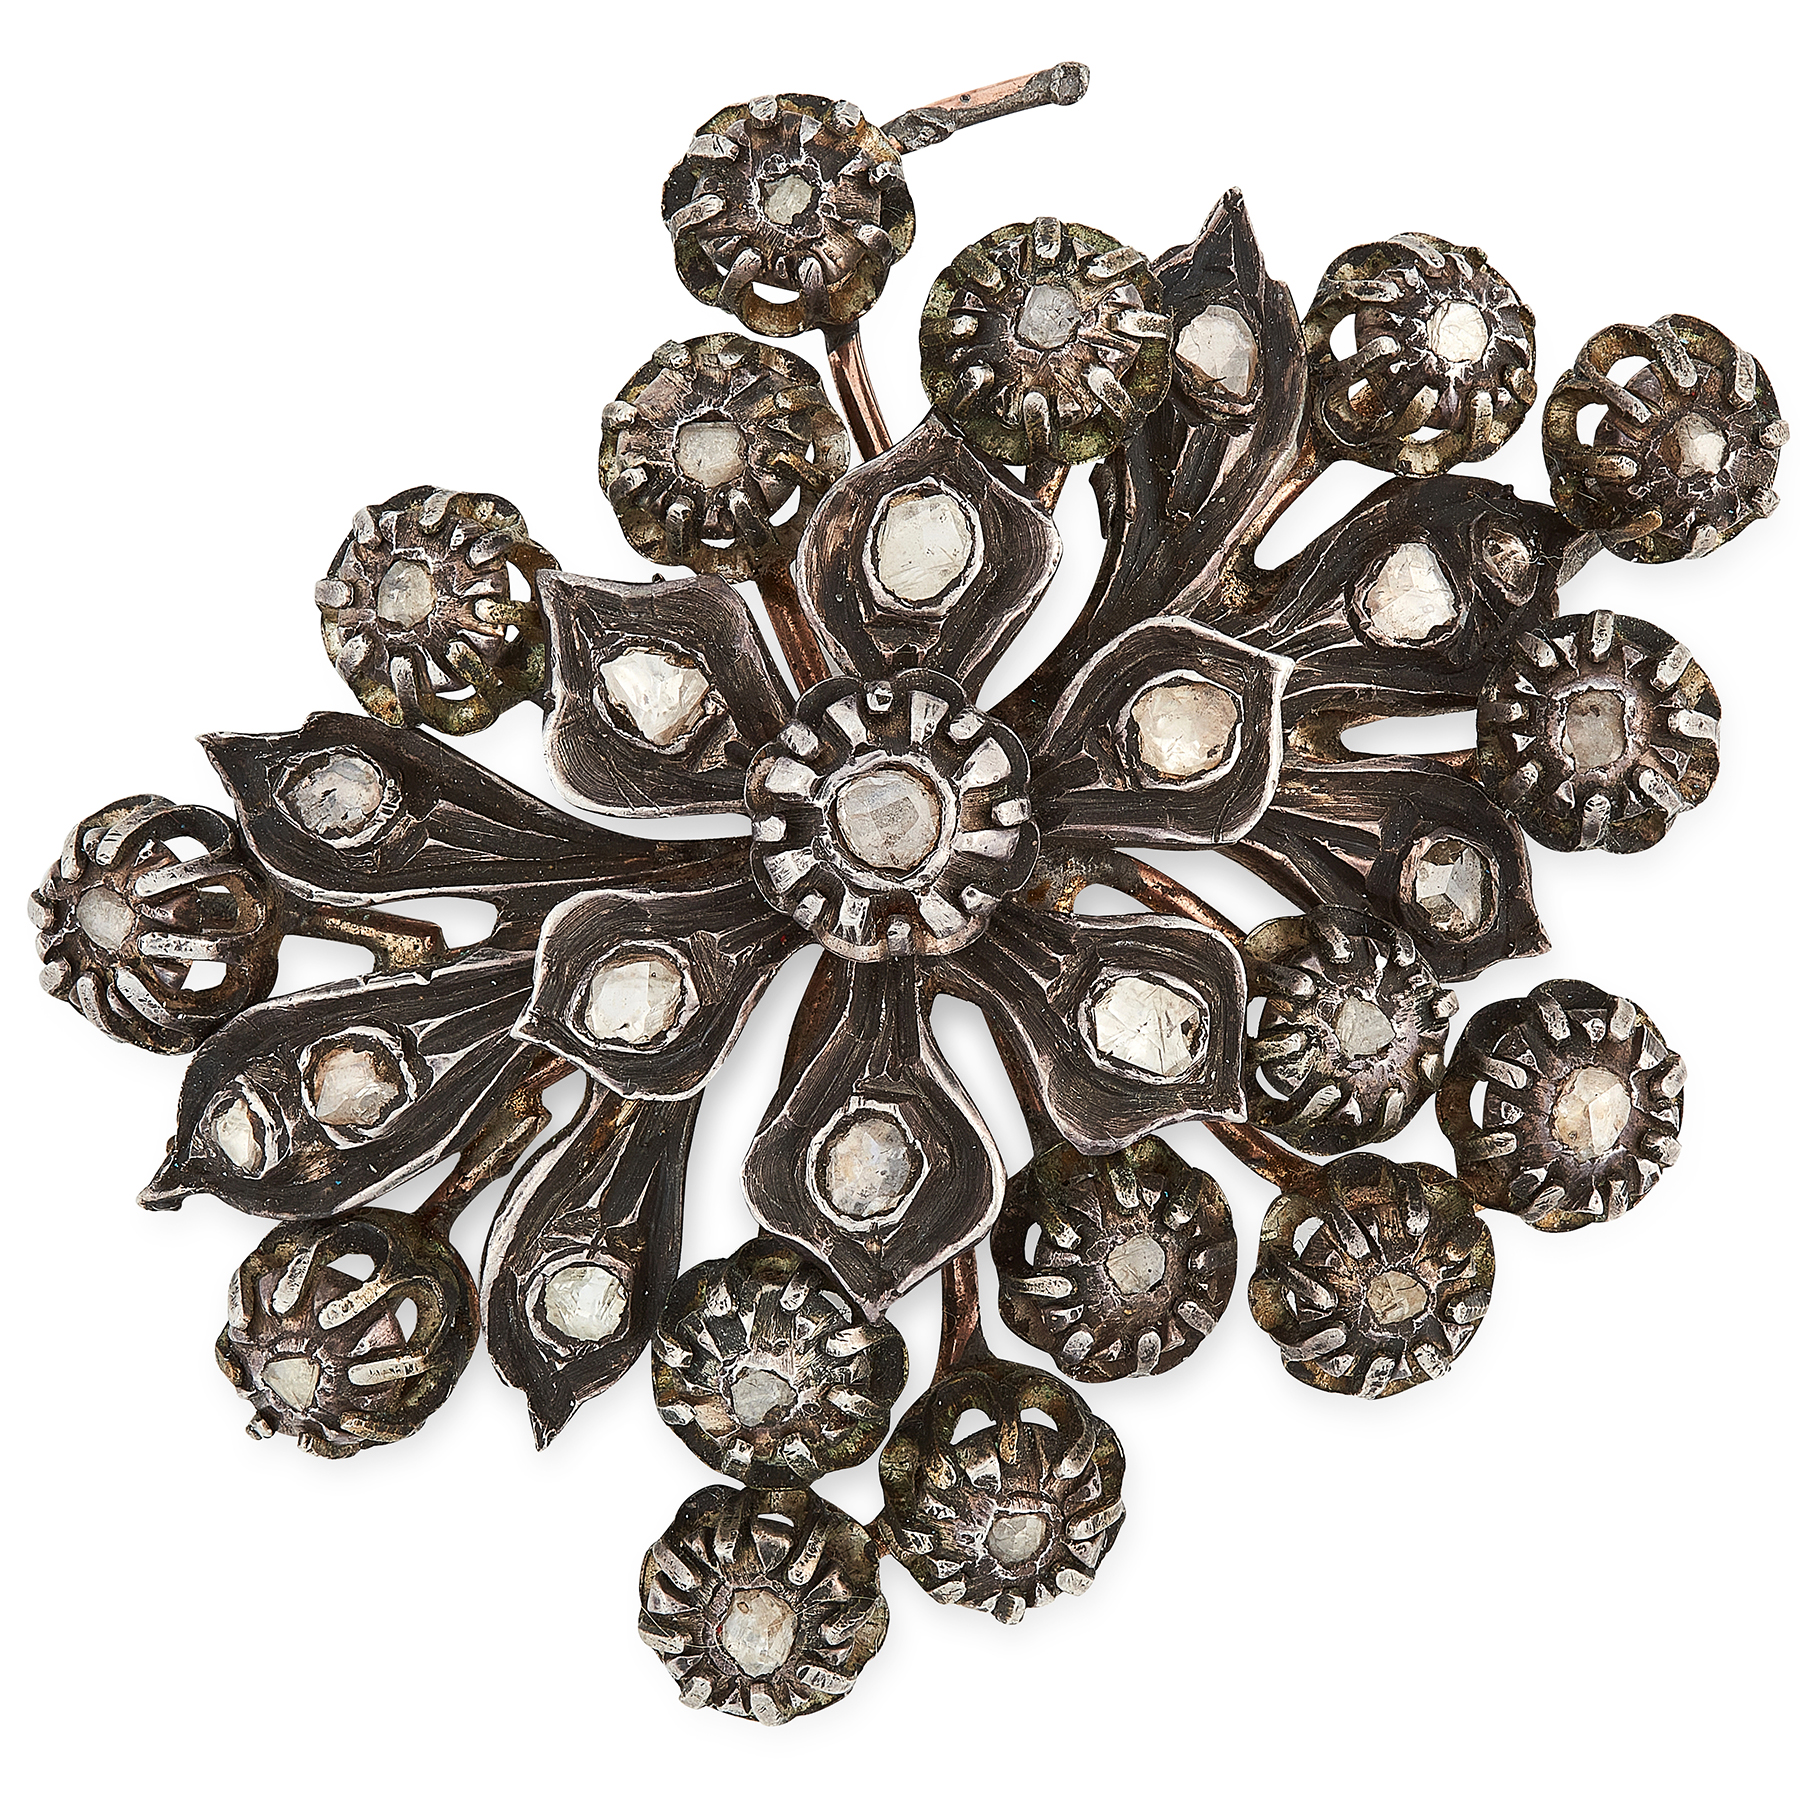 AN ANTIQUE DIAMOND JEWEL, 19TH CENTURY in silver and gold, designed as a floral motif, set with flat